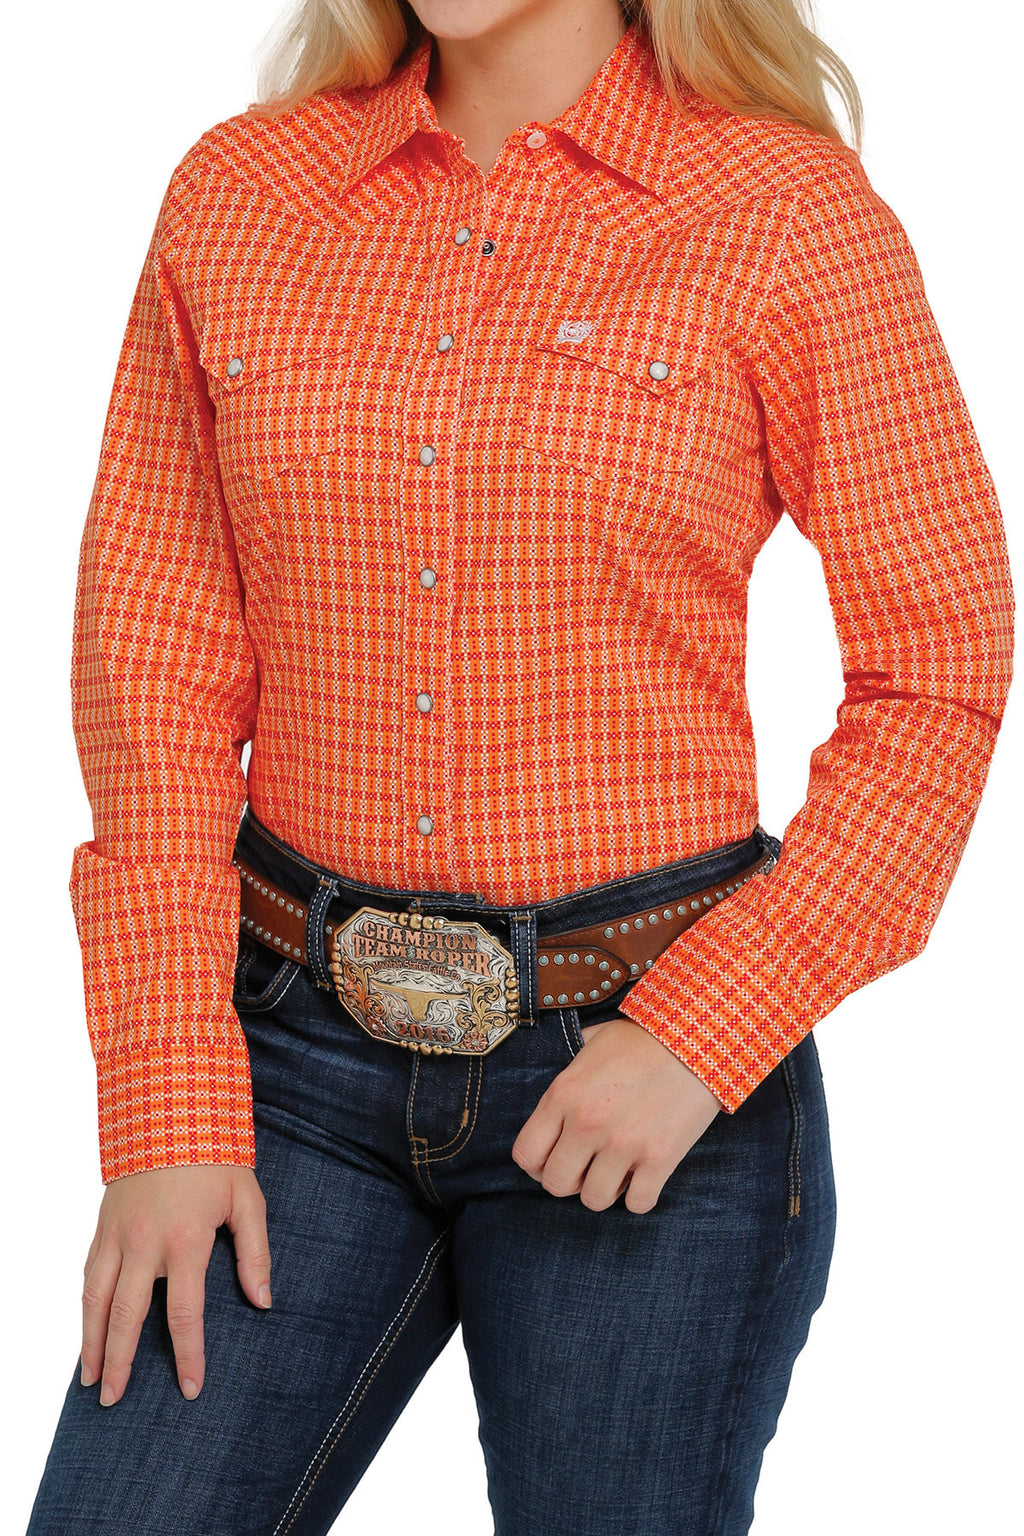 CINCH Women's Orange and Red Snap Front Western Shirt